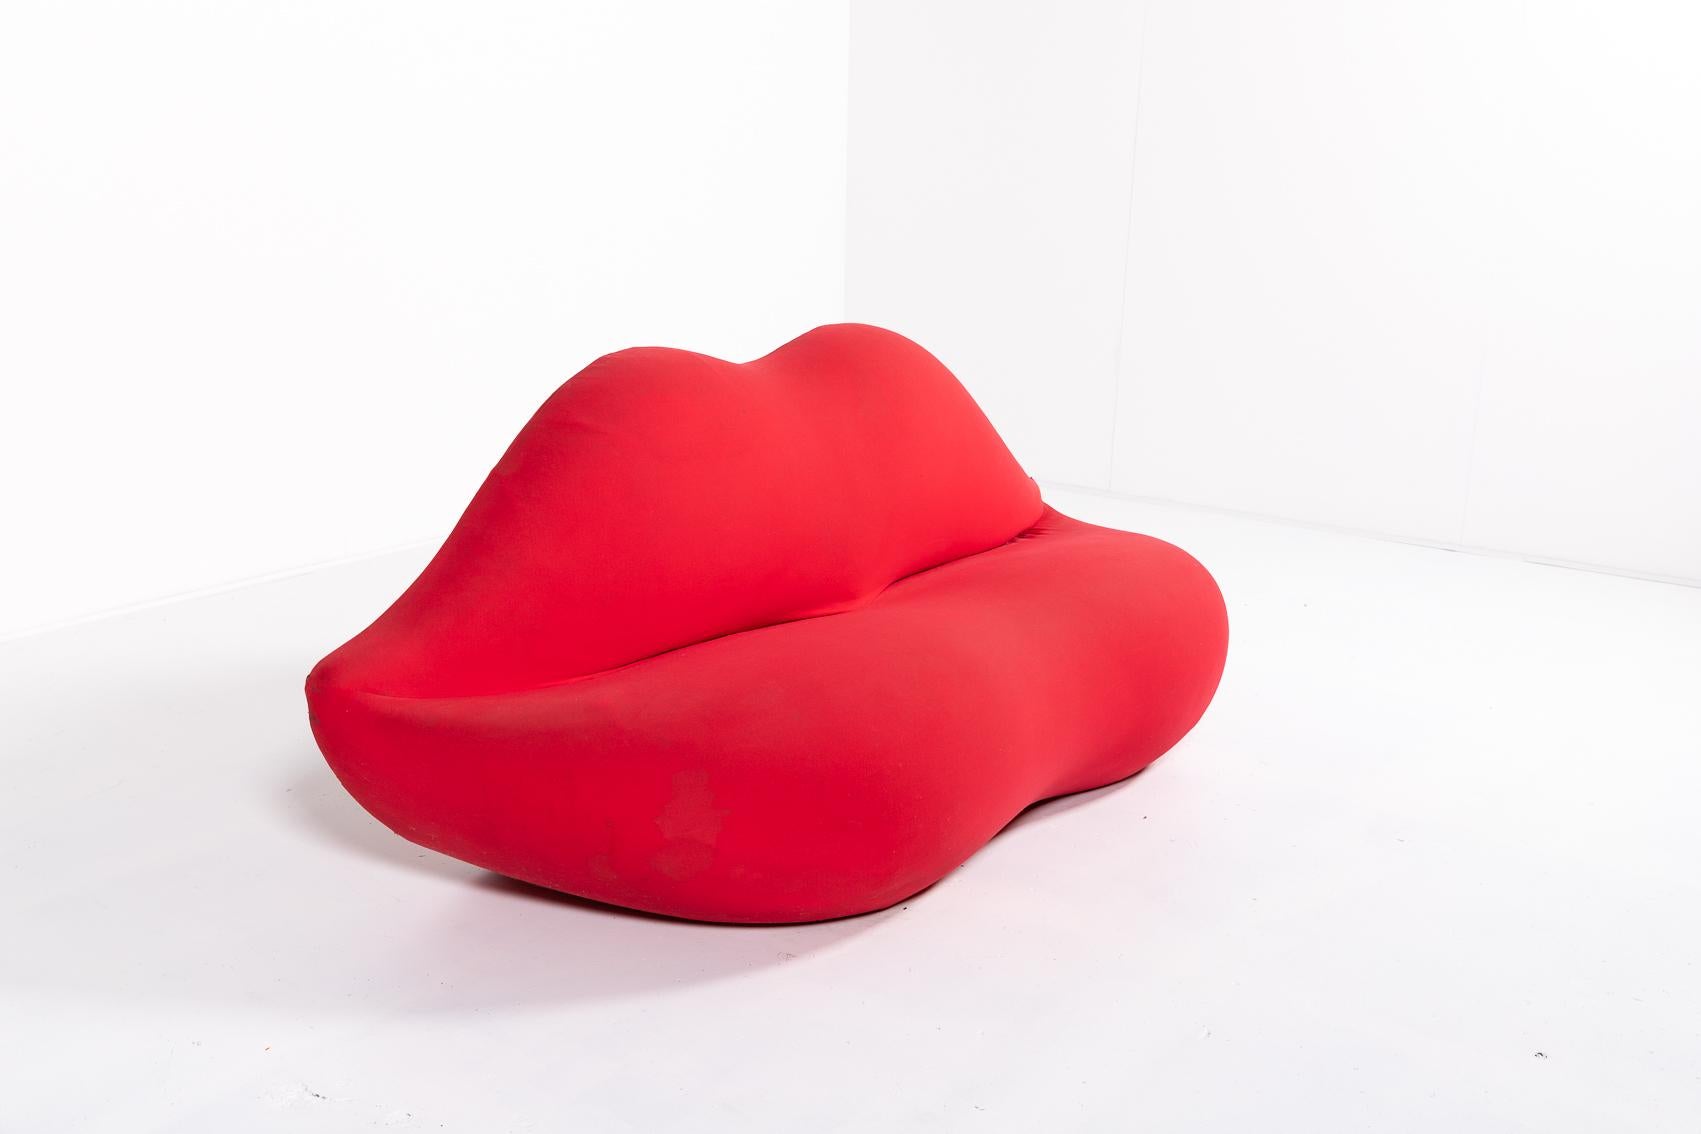 Iconic First Edition Studio 65 ‘Bocca’ Lip sofa by Gufram. Since 1970’s this spectacular pop art piece more than others represents the perfect abstraction of feminine beauty.

Condition
Fair, usage marks and stains. Removable